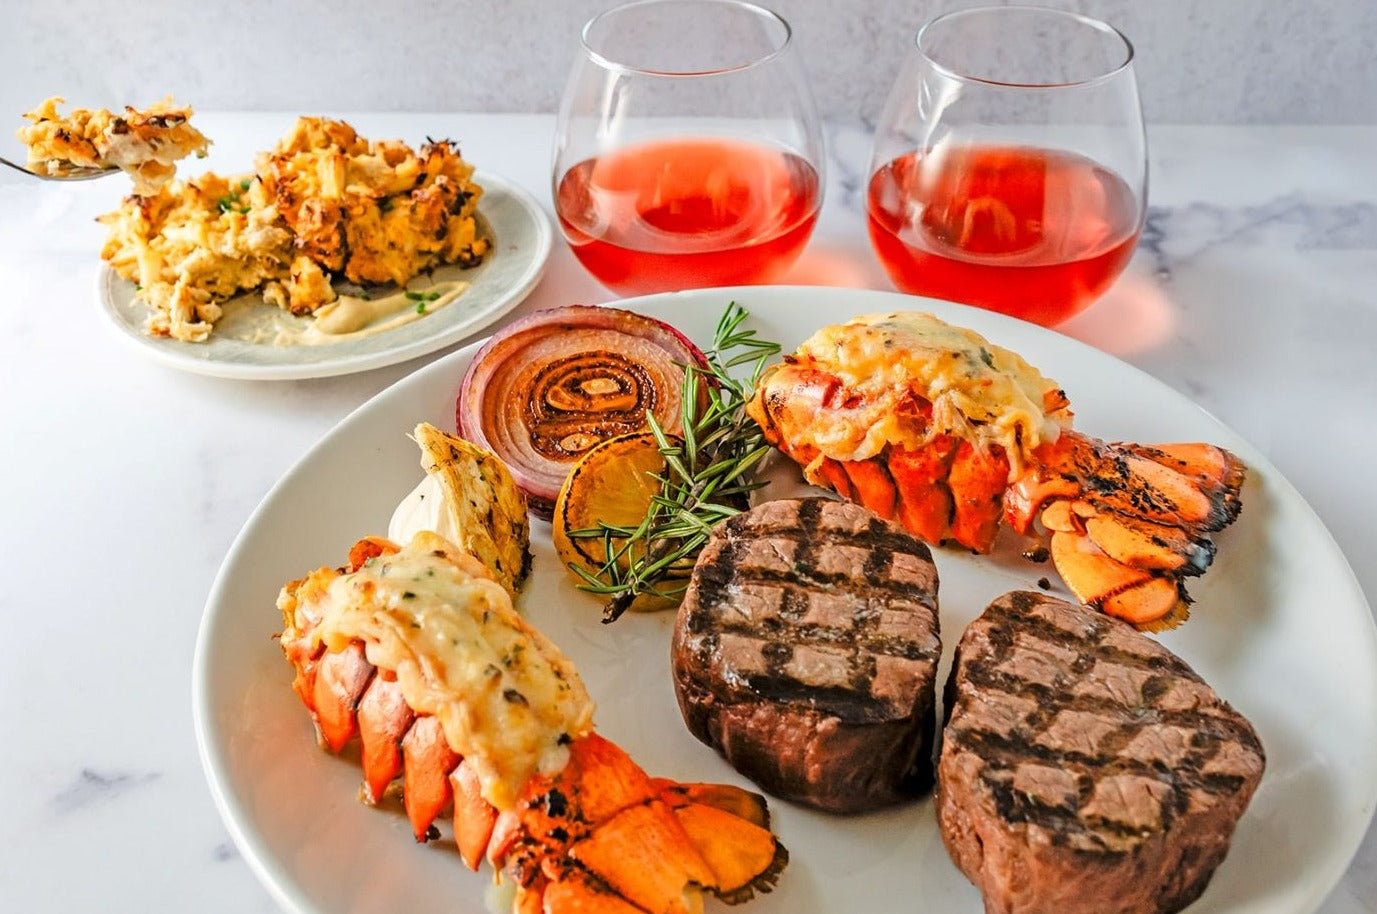 Steak, Lobster and Crab Combo